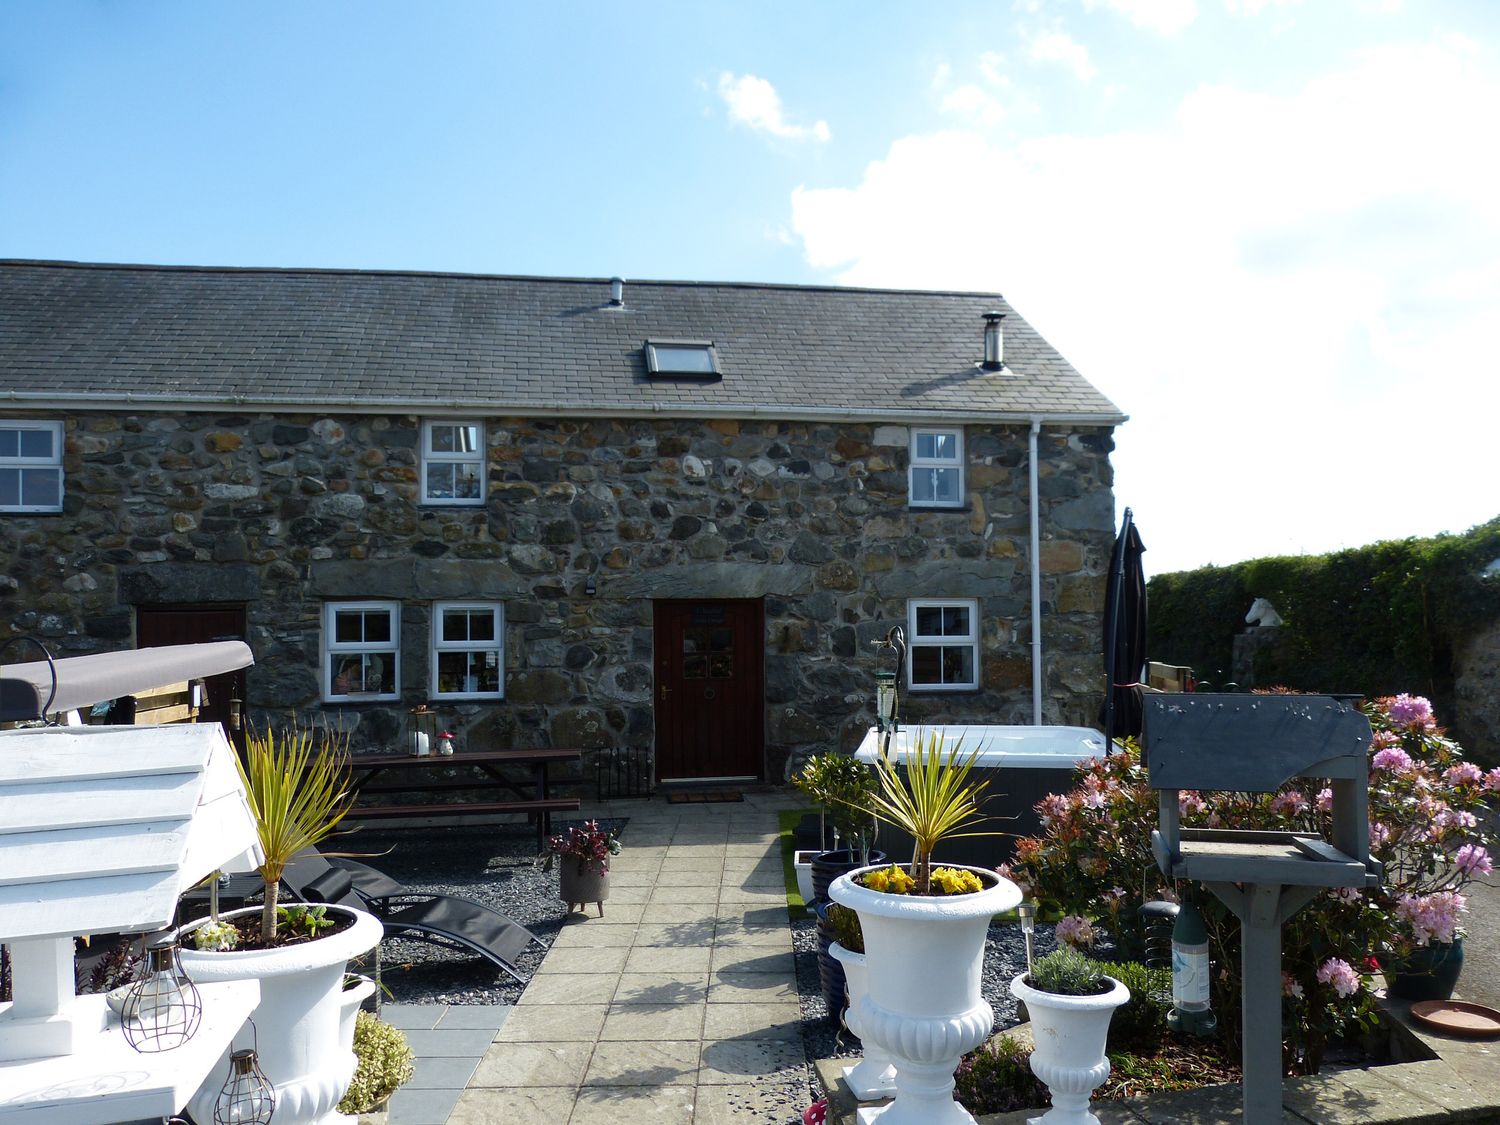 Stable Cottage - North Wales - 1017678 - photo 1